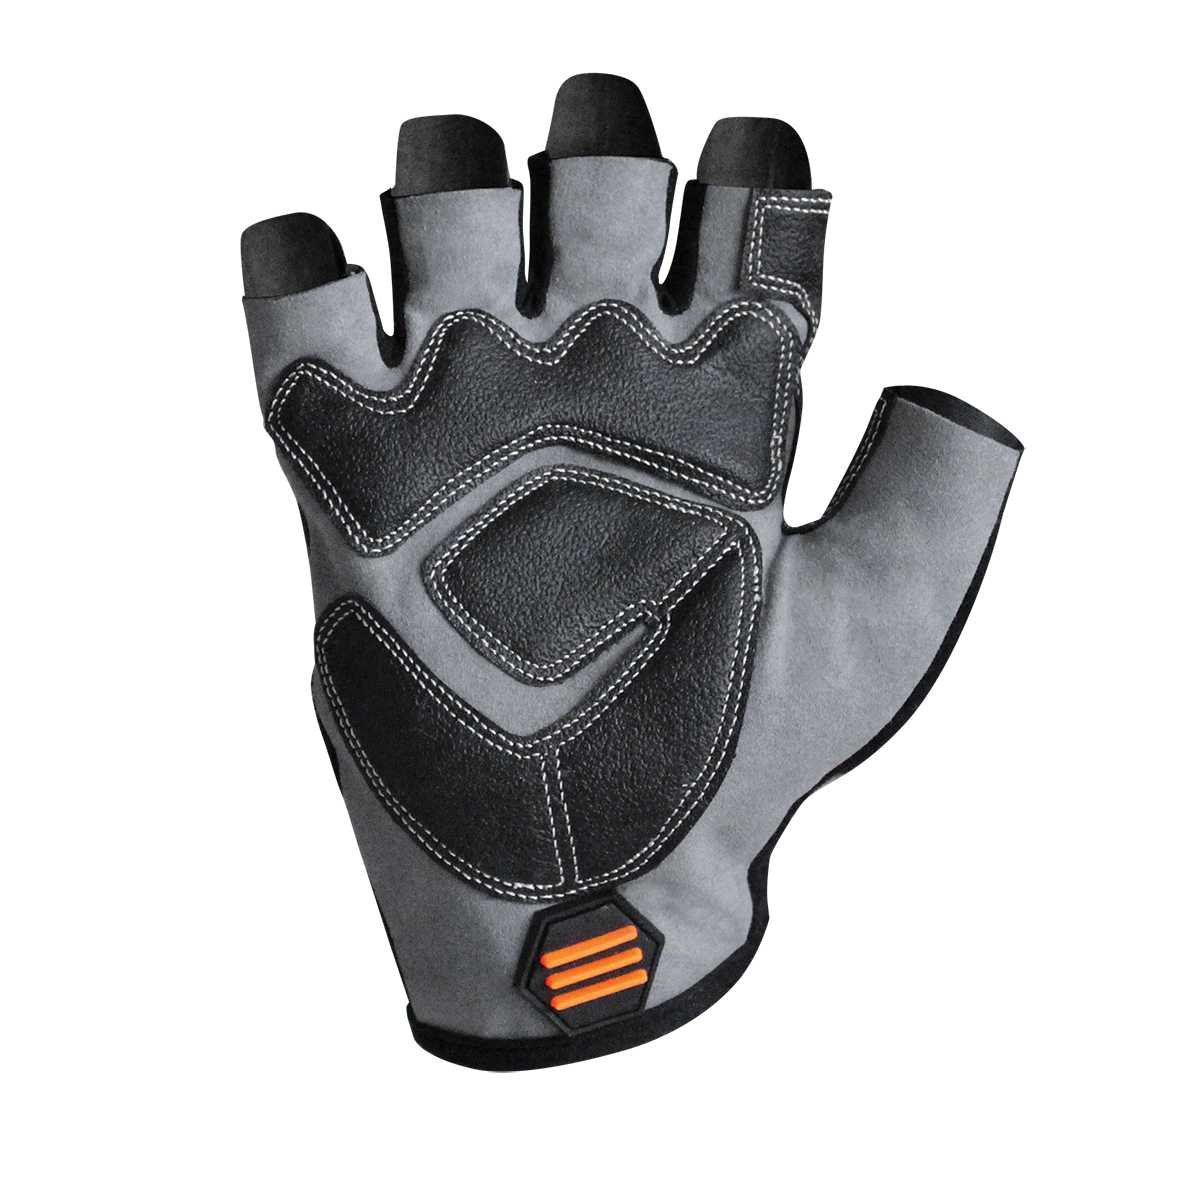 Armour Safety Products Ltd. - Duty Utility Master Glove